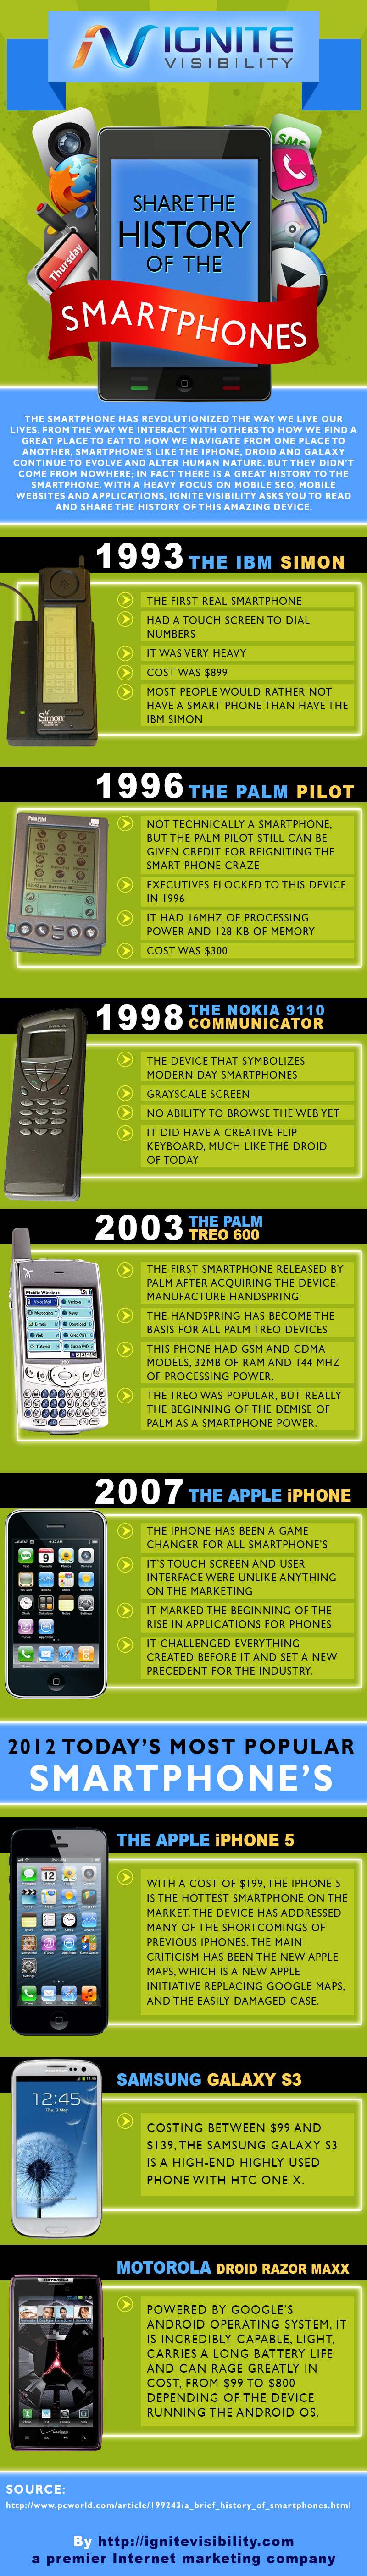 The History of the Smartphone 